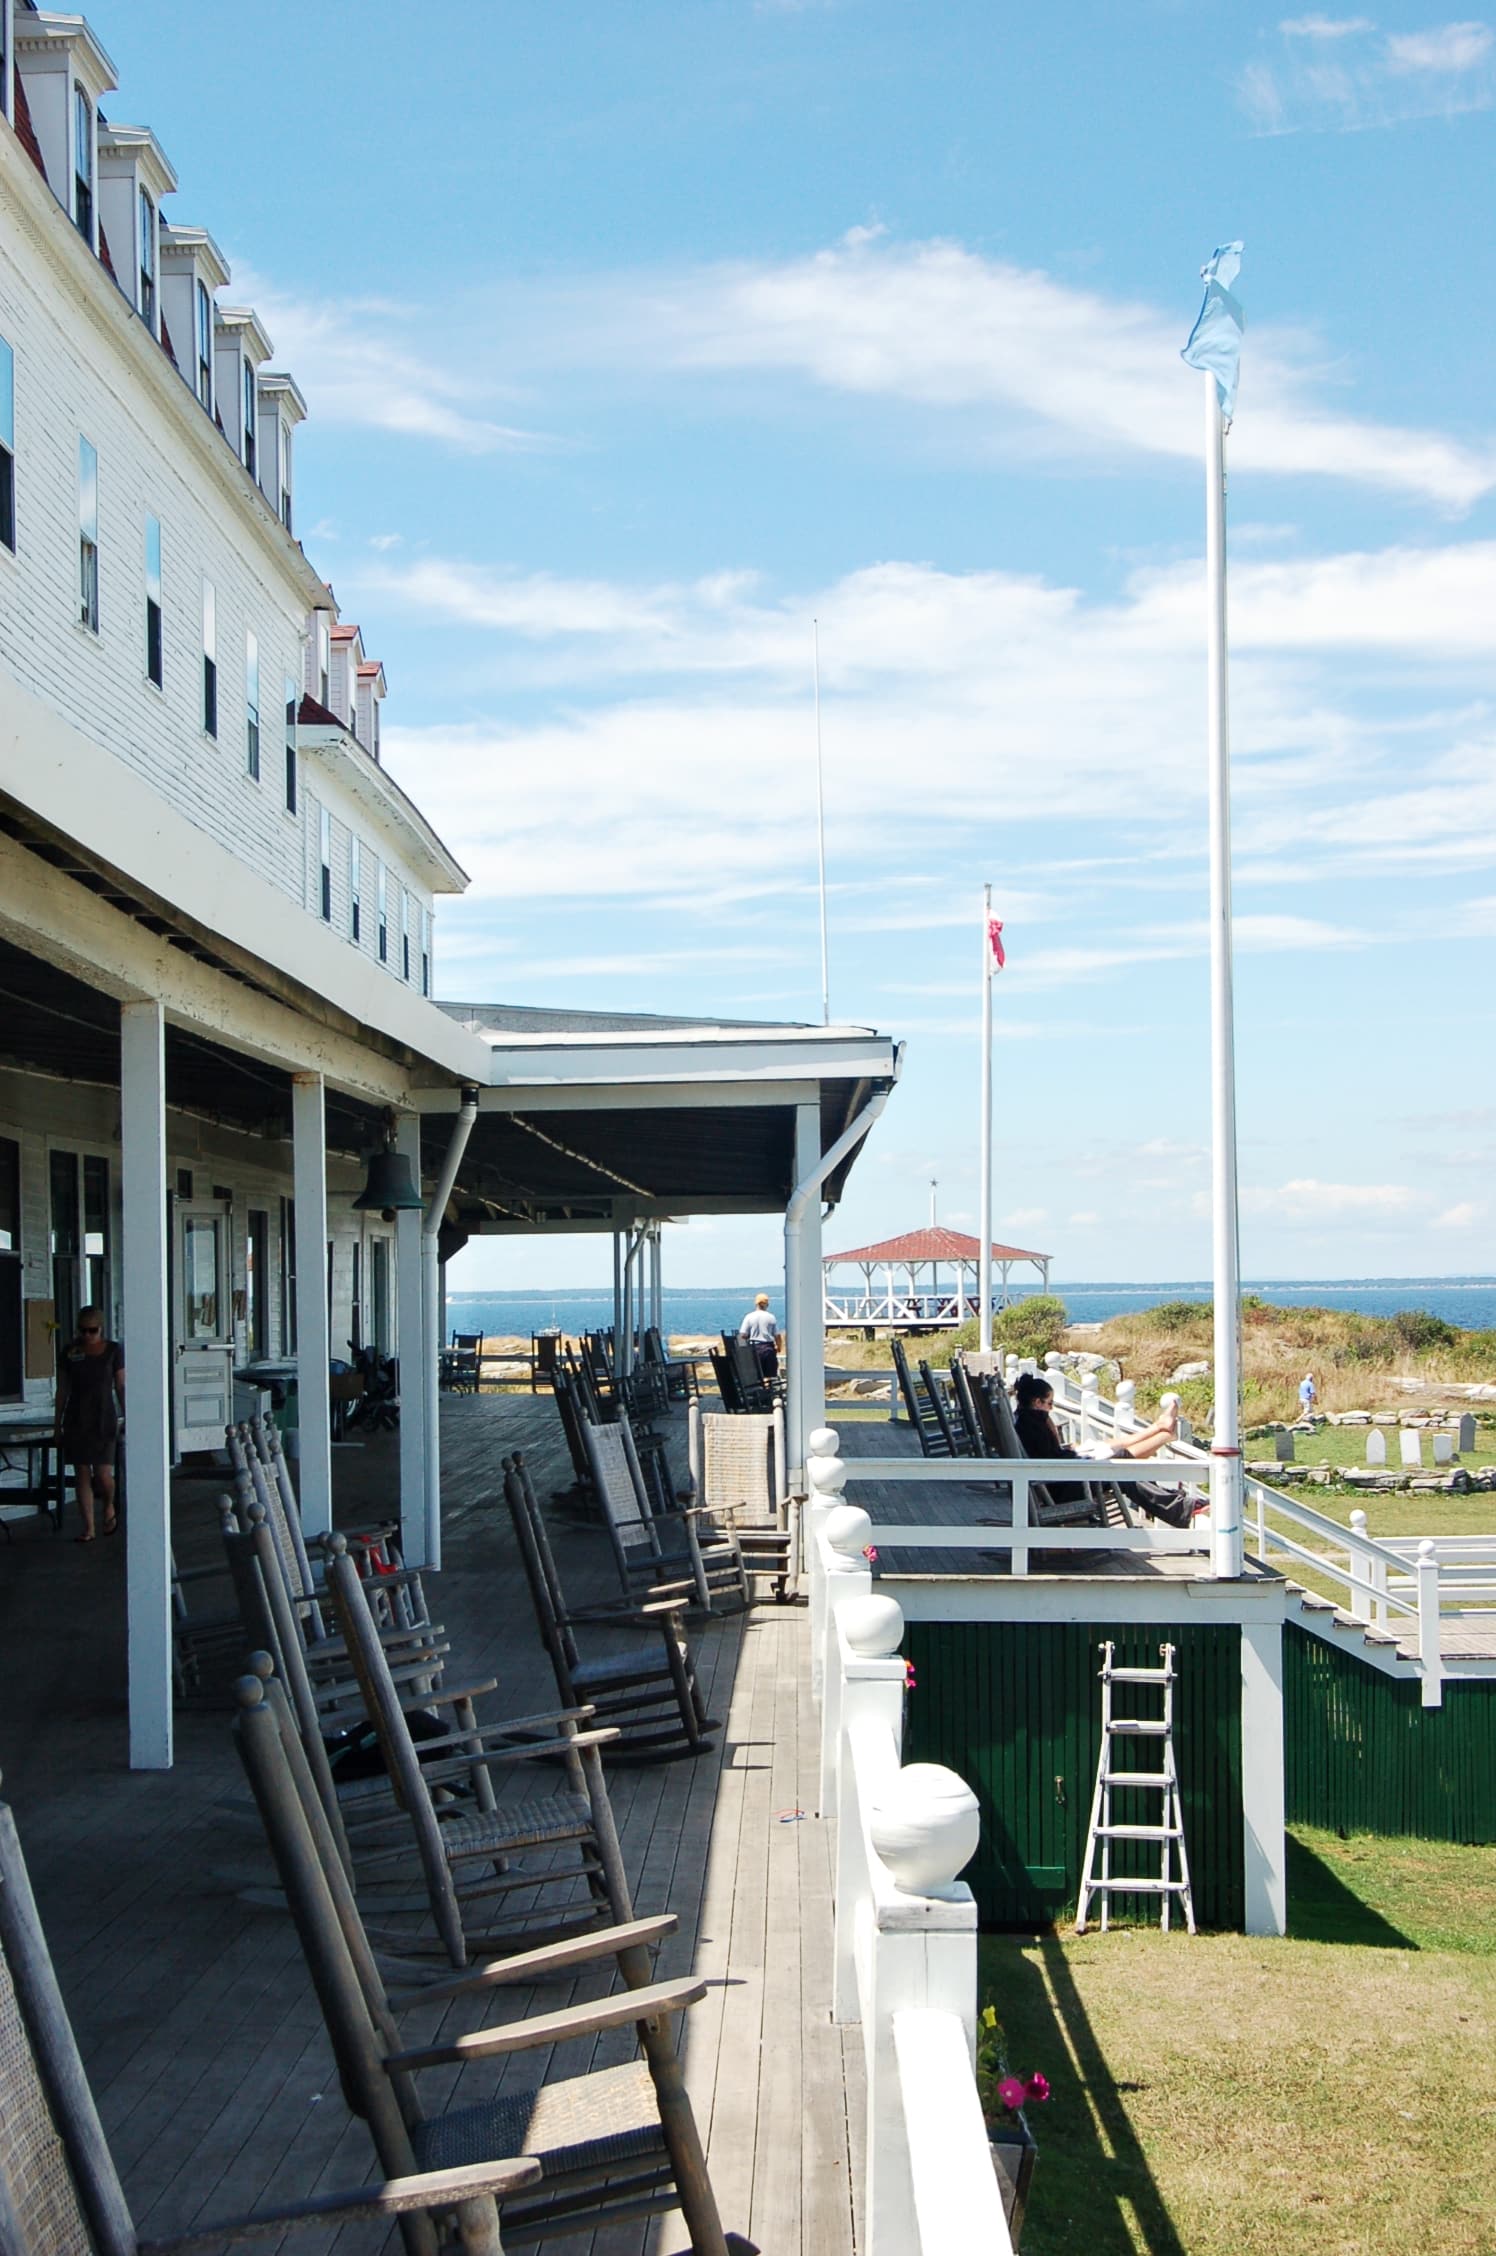 The famous Oceanic Hotel porch.